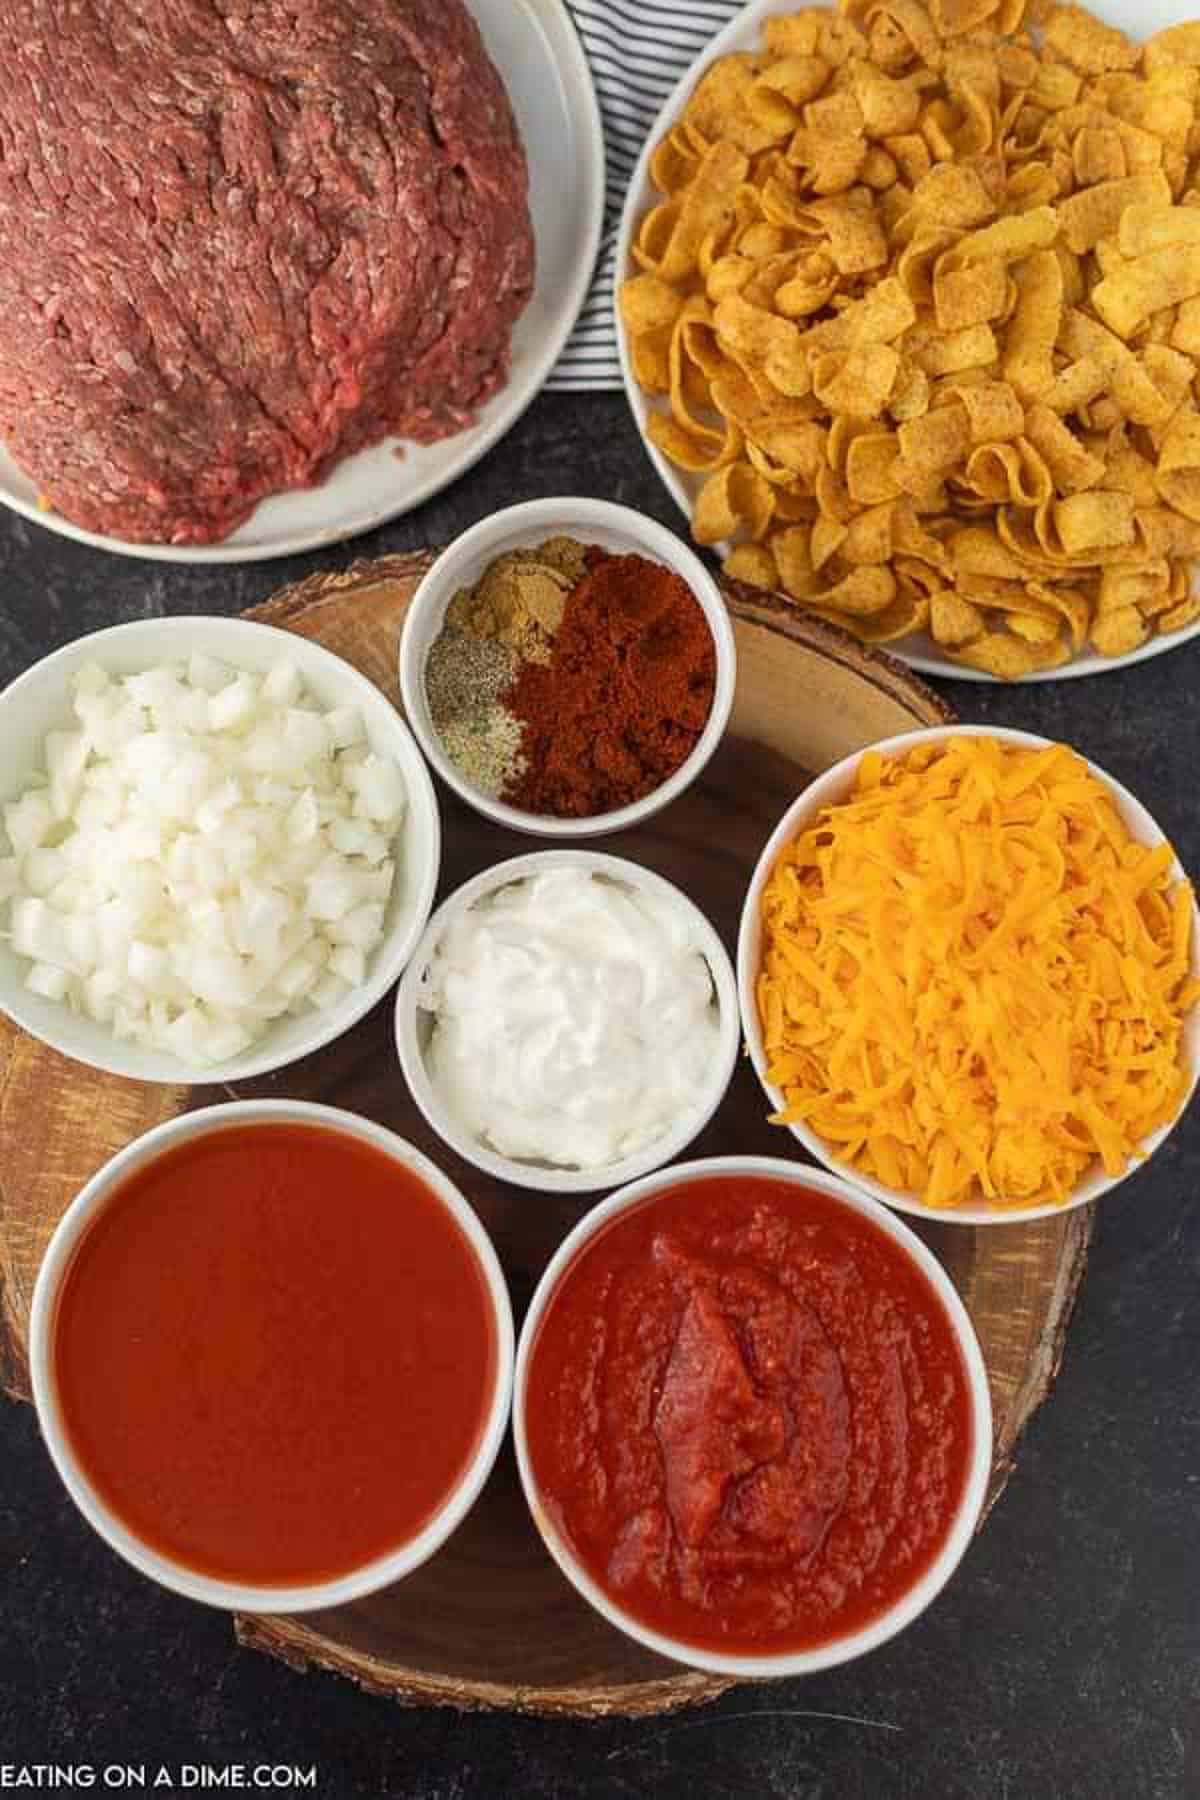 Ingredients to make Instant Pot Frito Chili Pie Recipe: Ground Beef, Beef Broth, diced onions, minced garlic, pinto beans, chili powder, tomato sauce, cumin, salt, pepper and diced tomatoes 